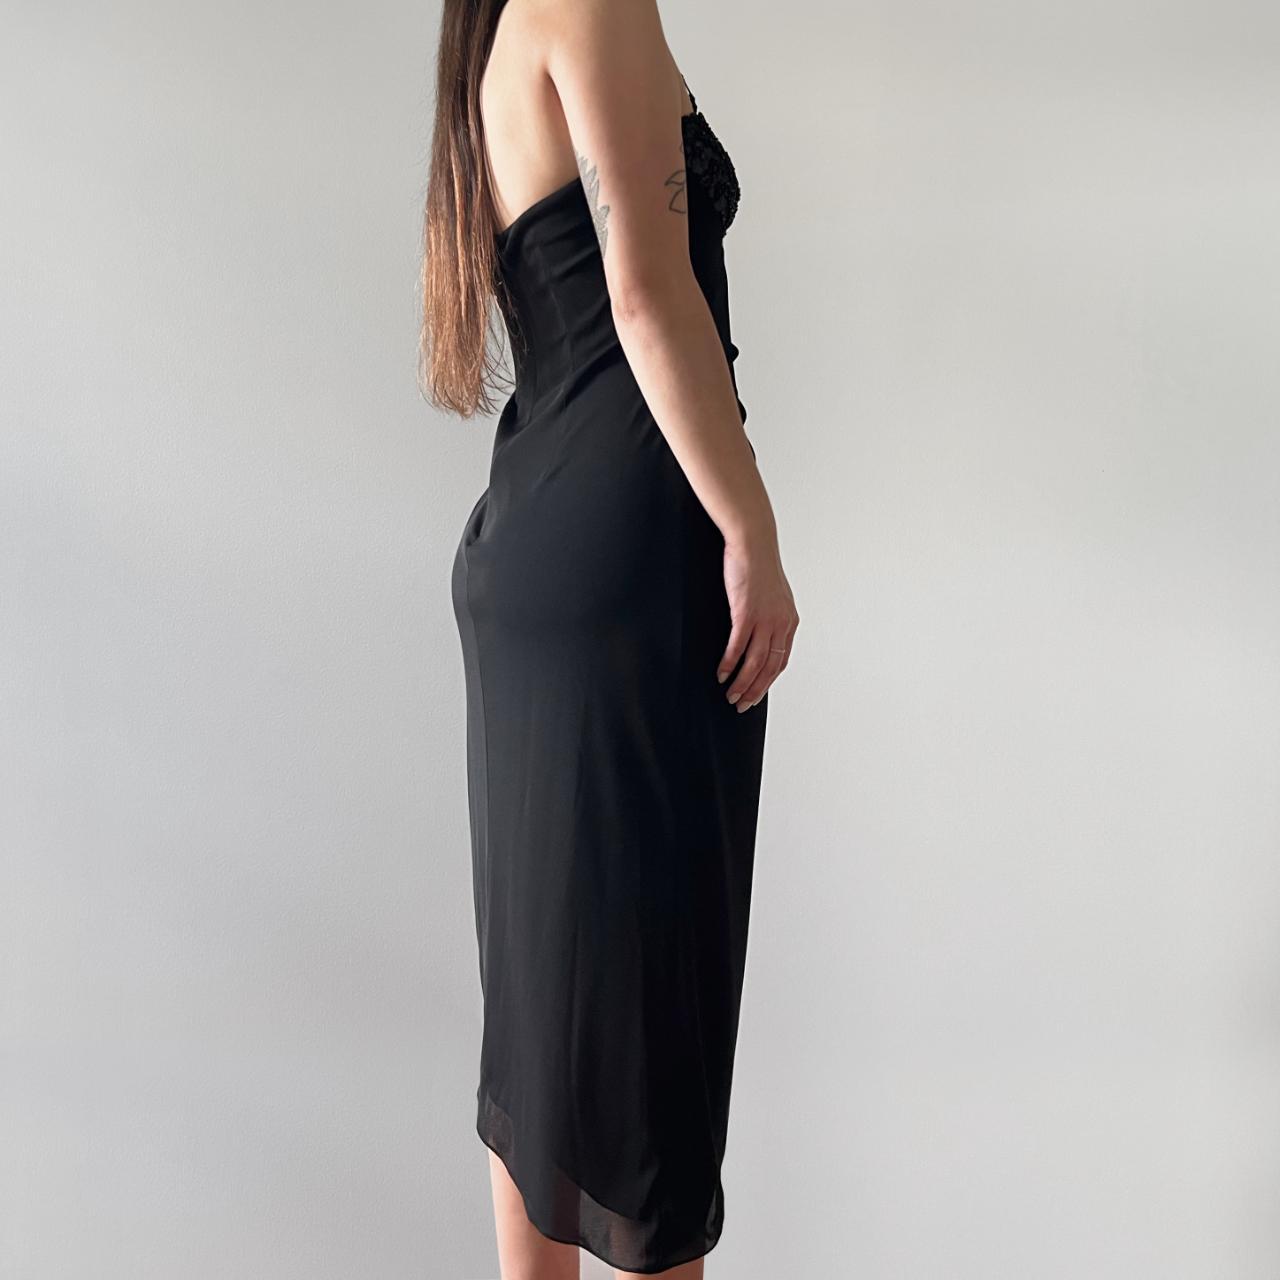 Product Image 2 - Early 2000s style formal midi